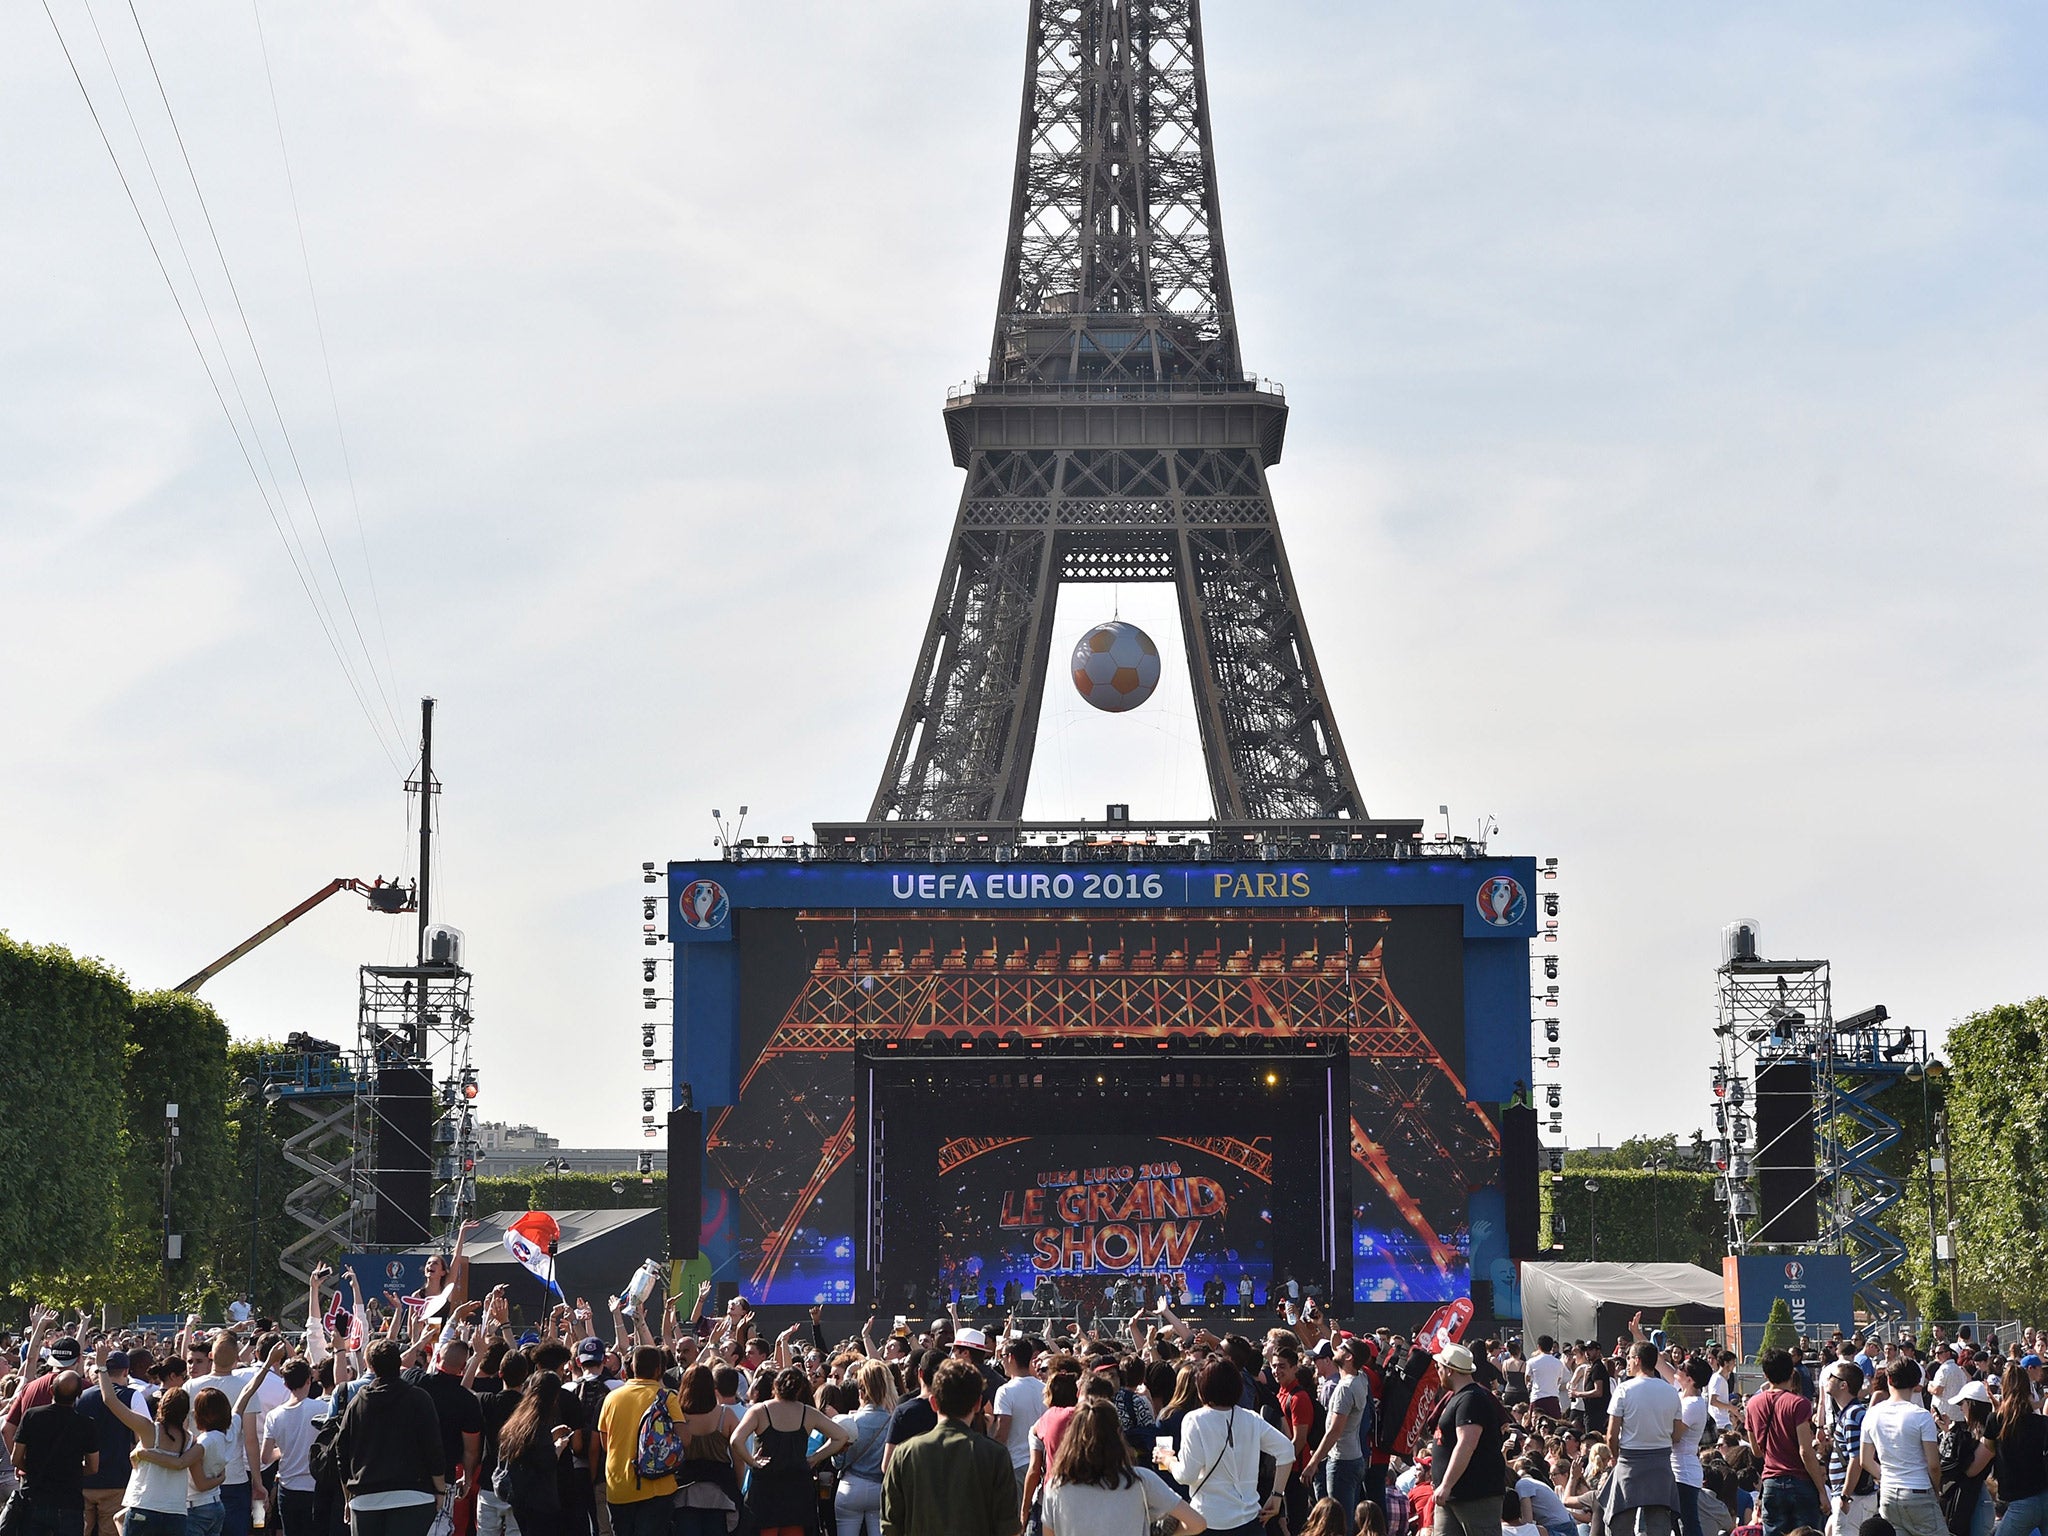 Bars and restaurants will not be able to show Euro 2016 matches outside